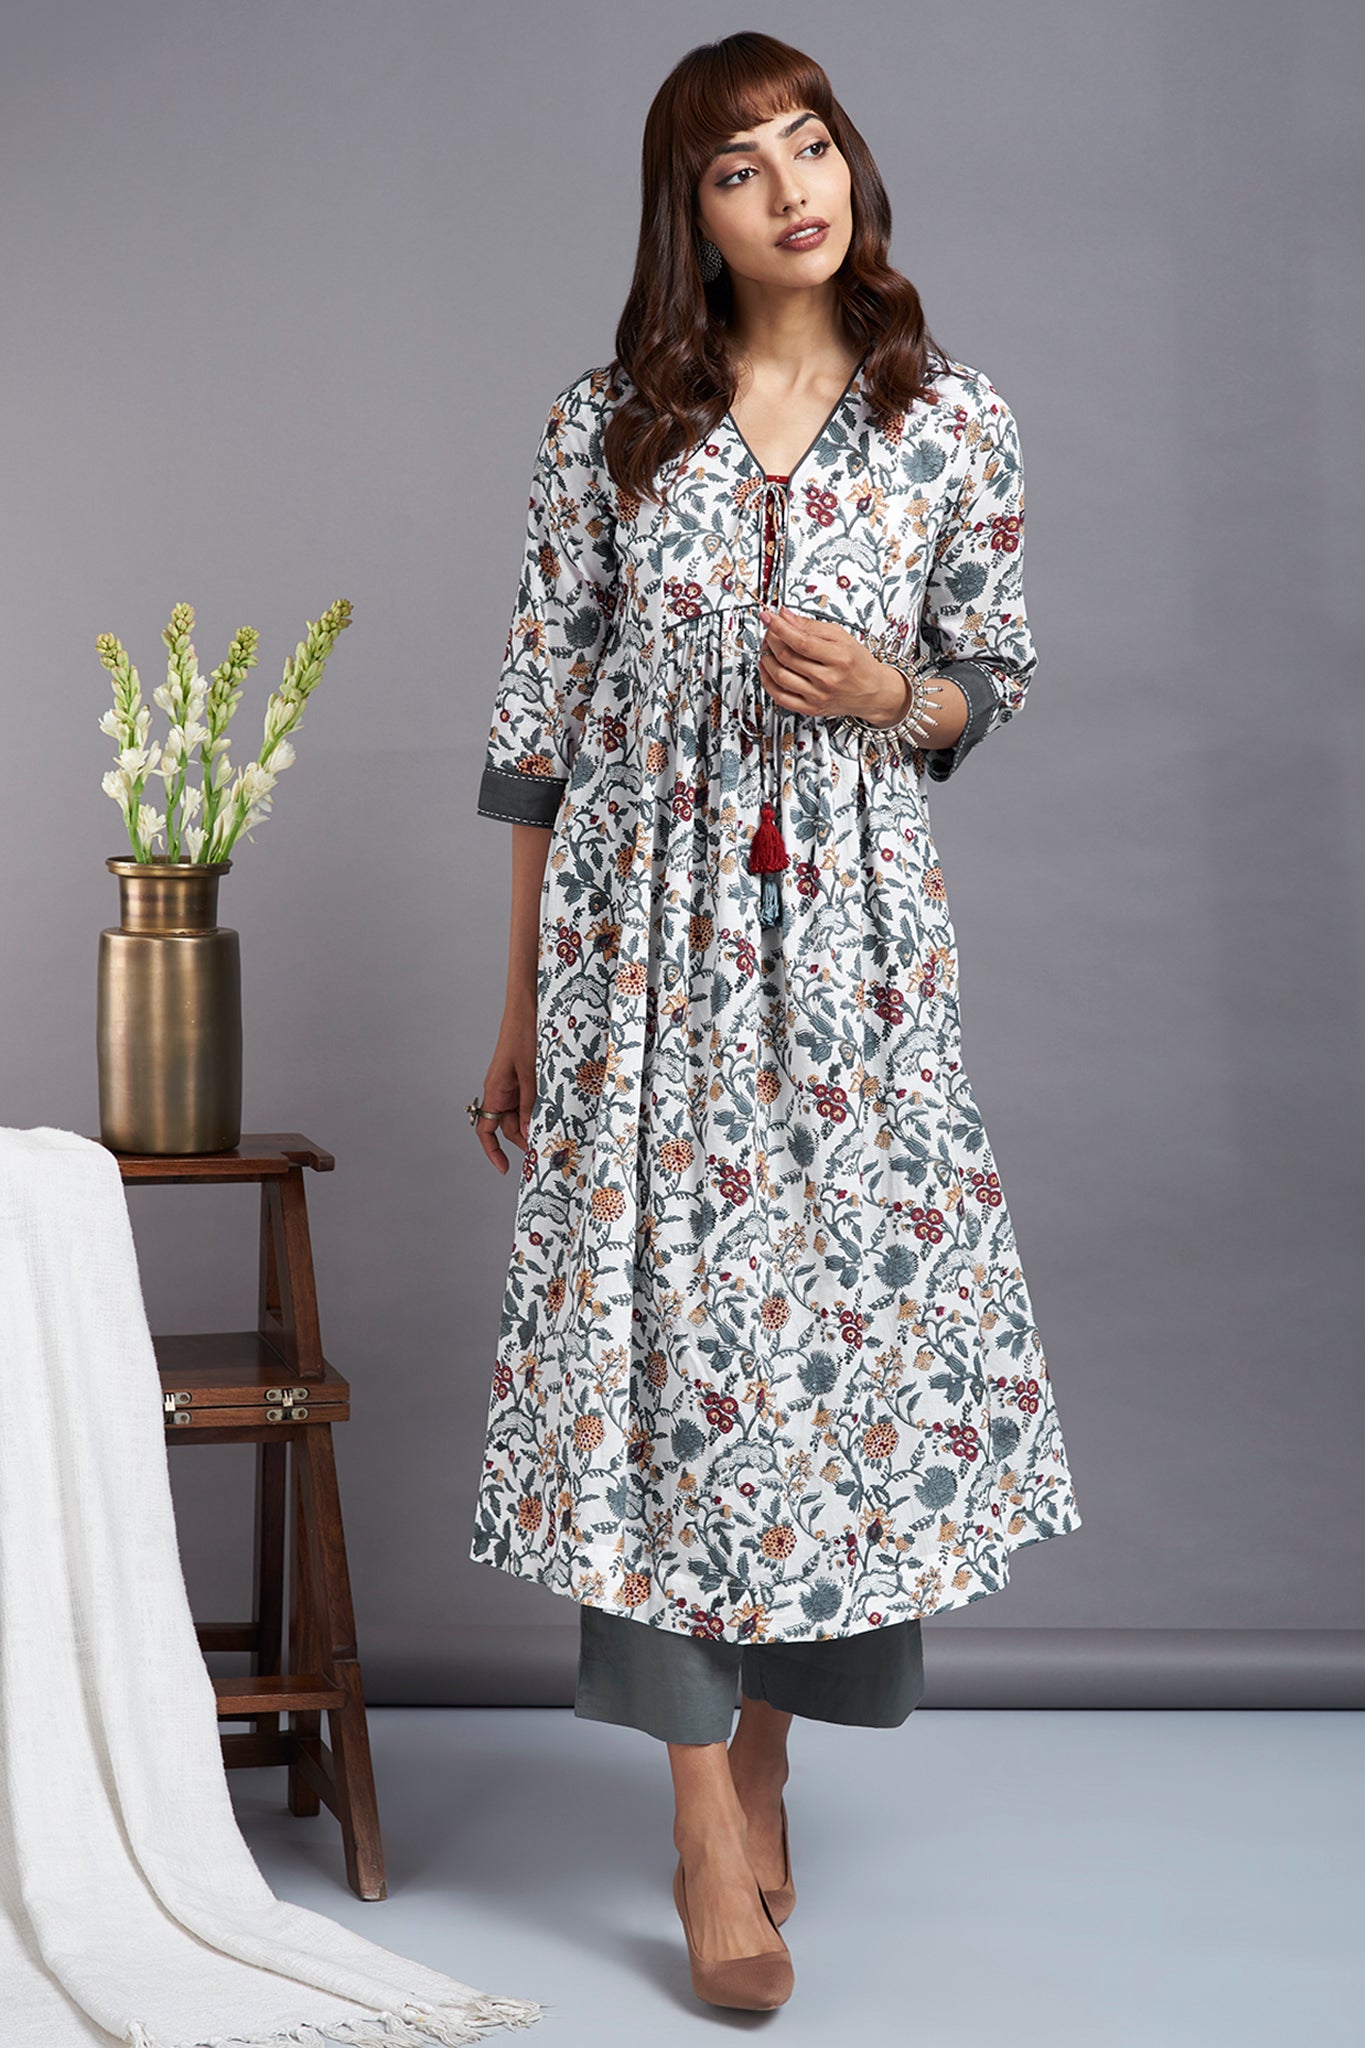 Myntra End Of Reason Sale 2019: From Libas To House Of Pataudi, Your  Favourite Ethnic Brands At Up To 60% Off